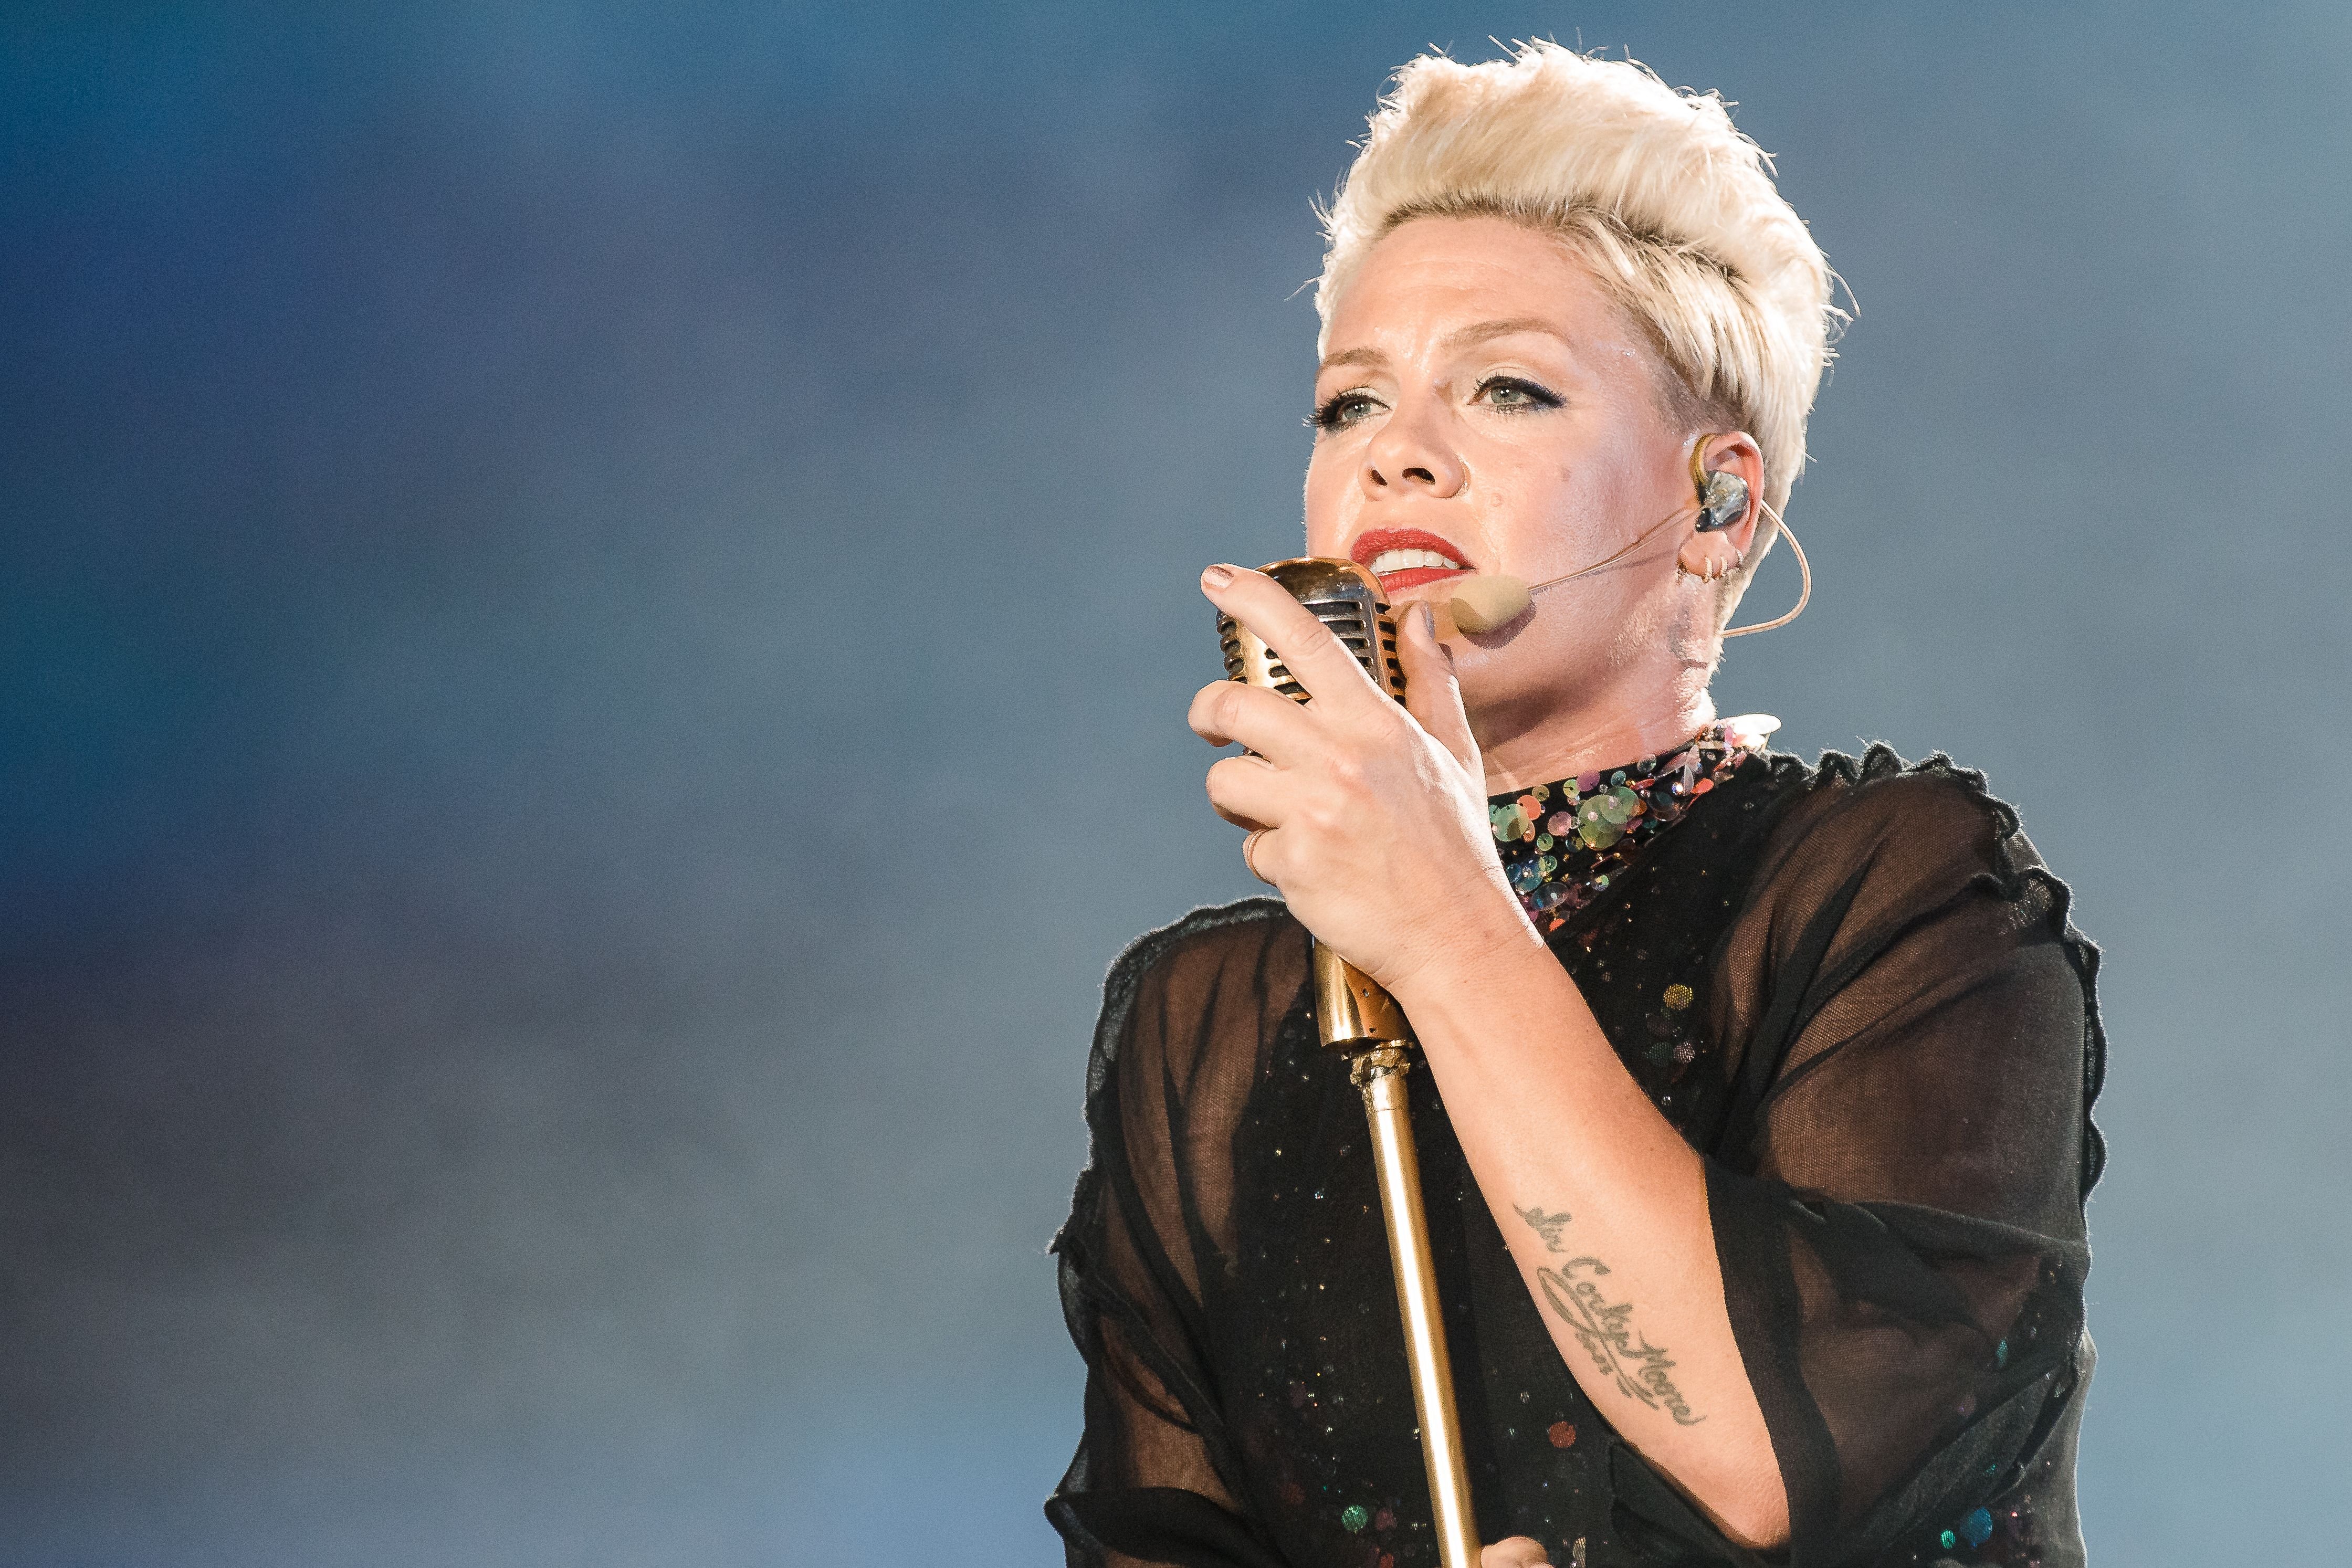 P!nk performed at day 6 of Rock In Rio Music Festival at Cidade do Rock on October 5, 2019 | Photo: Getty Images